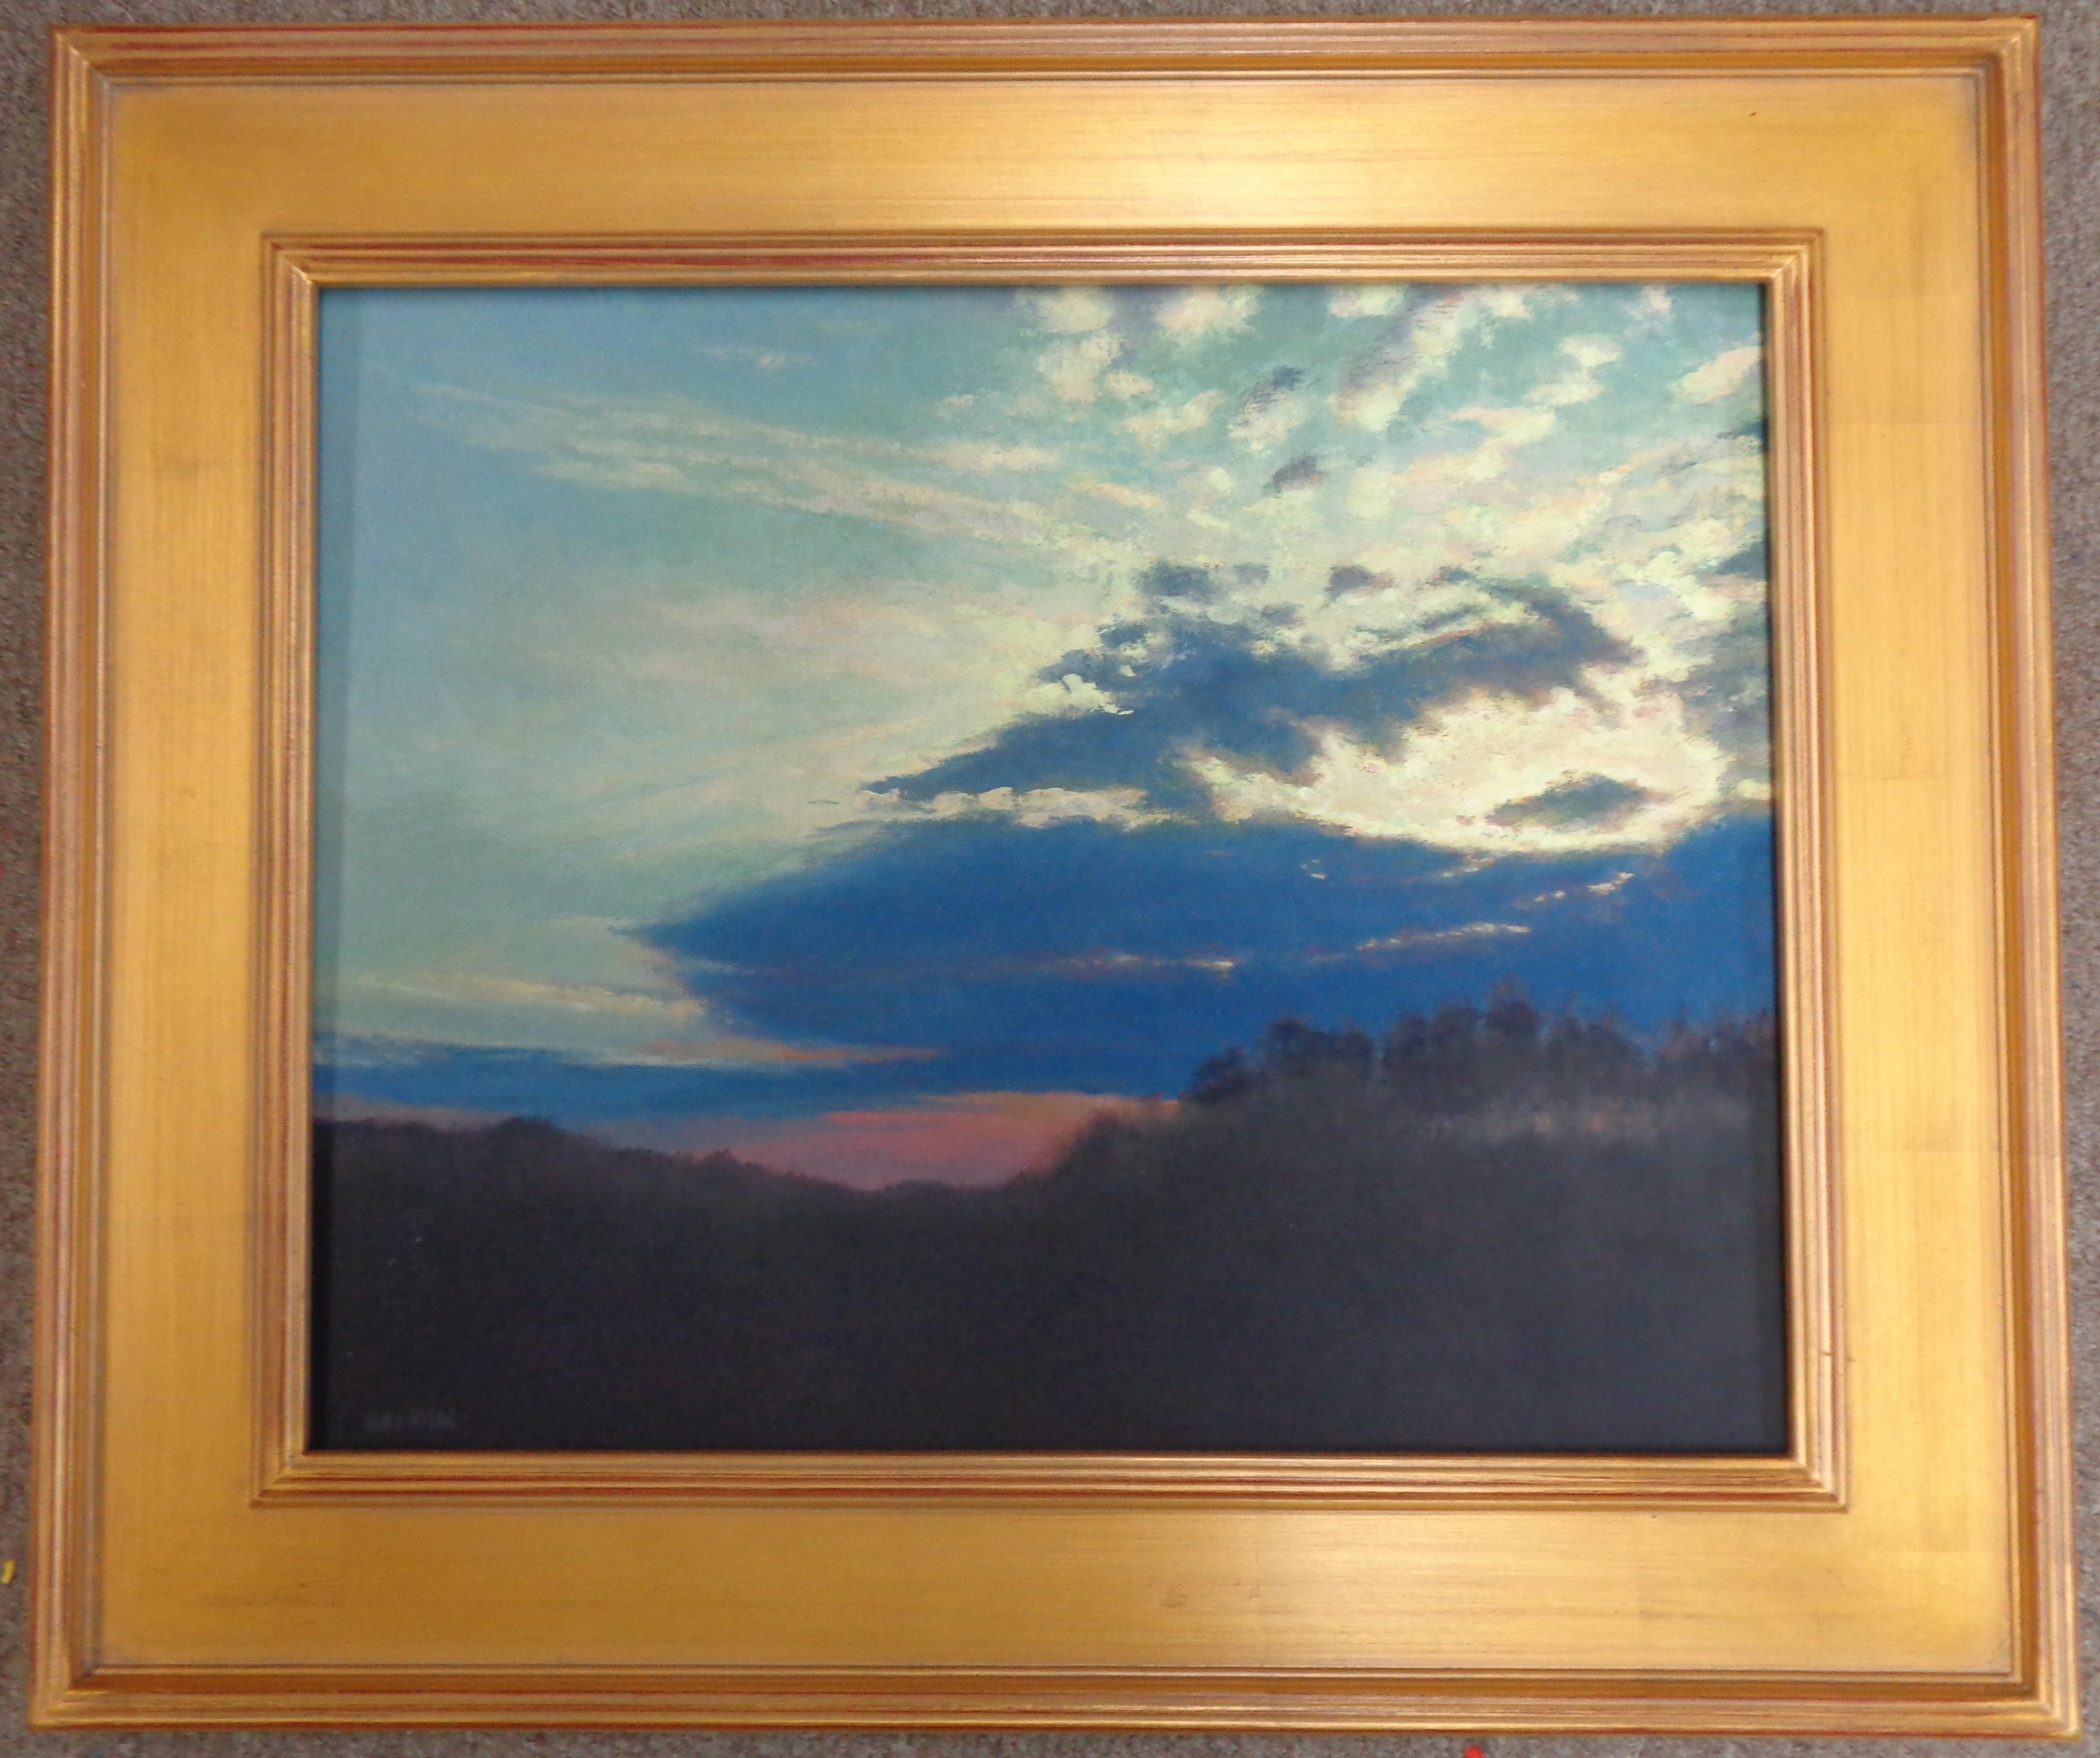 Beautiful Skies Study Series
oil/panel 16 x 20 image unframed 22.38 x 26.25 framed.
Beautiful Skies is an oil painting on canvas panel by award winning contemporary artist Michael Budden that showcases a beautiful rural landscape with a dramatic